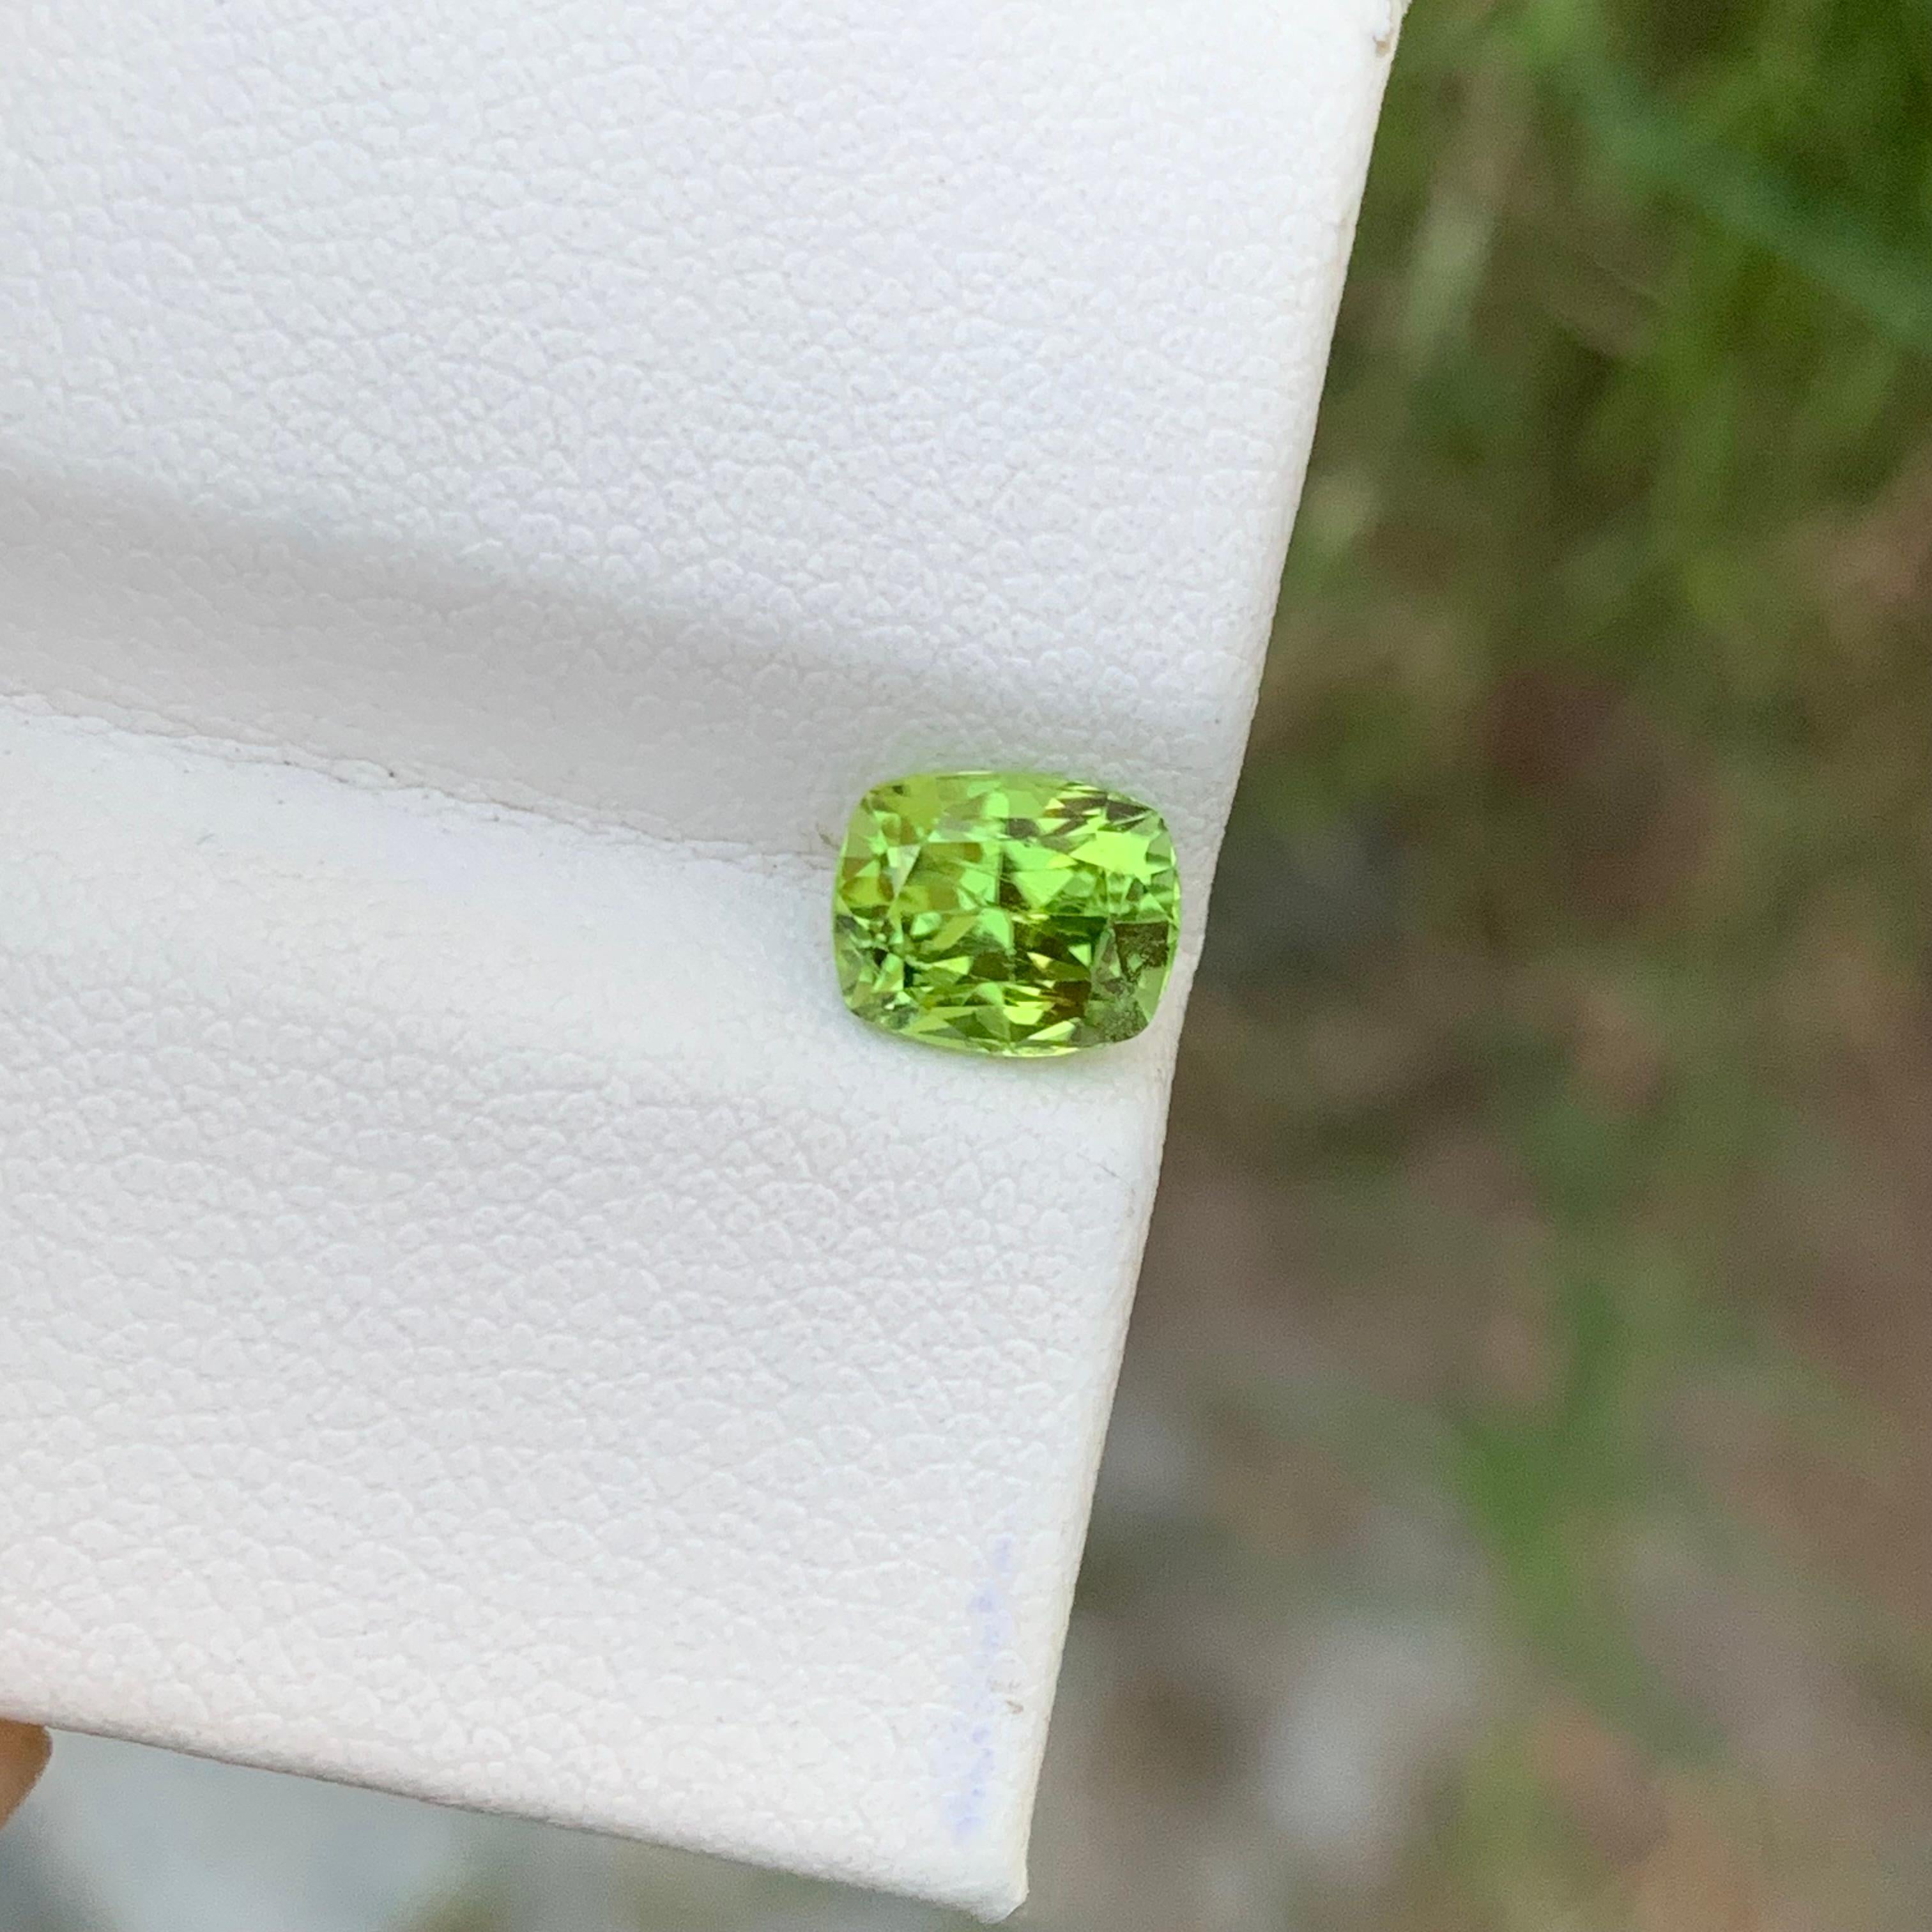 Natural Loose Peridot 
Weight: 1.60 Carats 
Dimension: 7.3x5.9x4.9 Mm
Origin: Supat Valley Pakistan 
Shape: Oval
Color: Green
Treatment: Non
Peridot, a vibrant and dazzling gemstone, is a remarkable member of the olivine mineral family. Renowned for